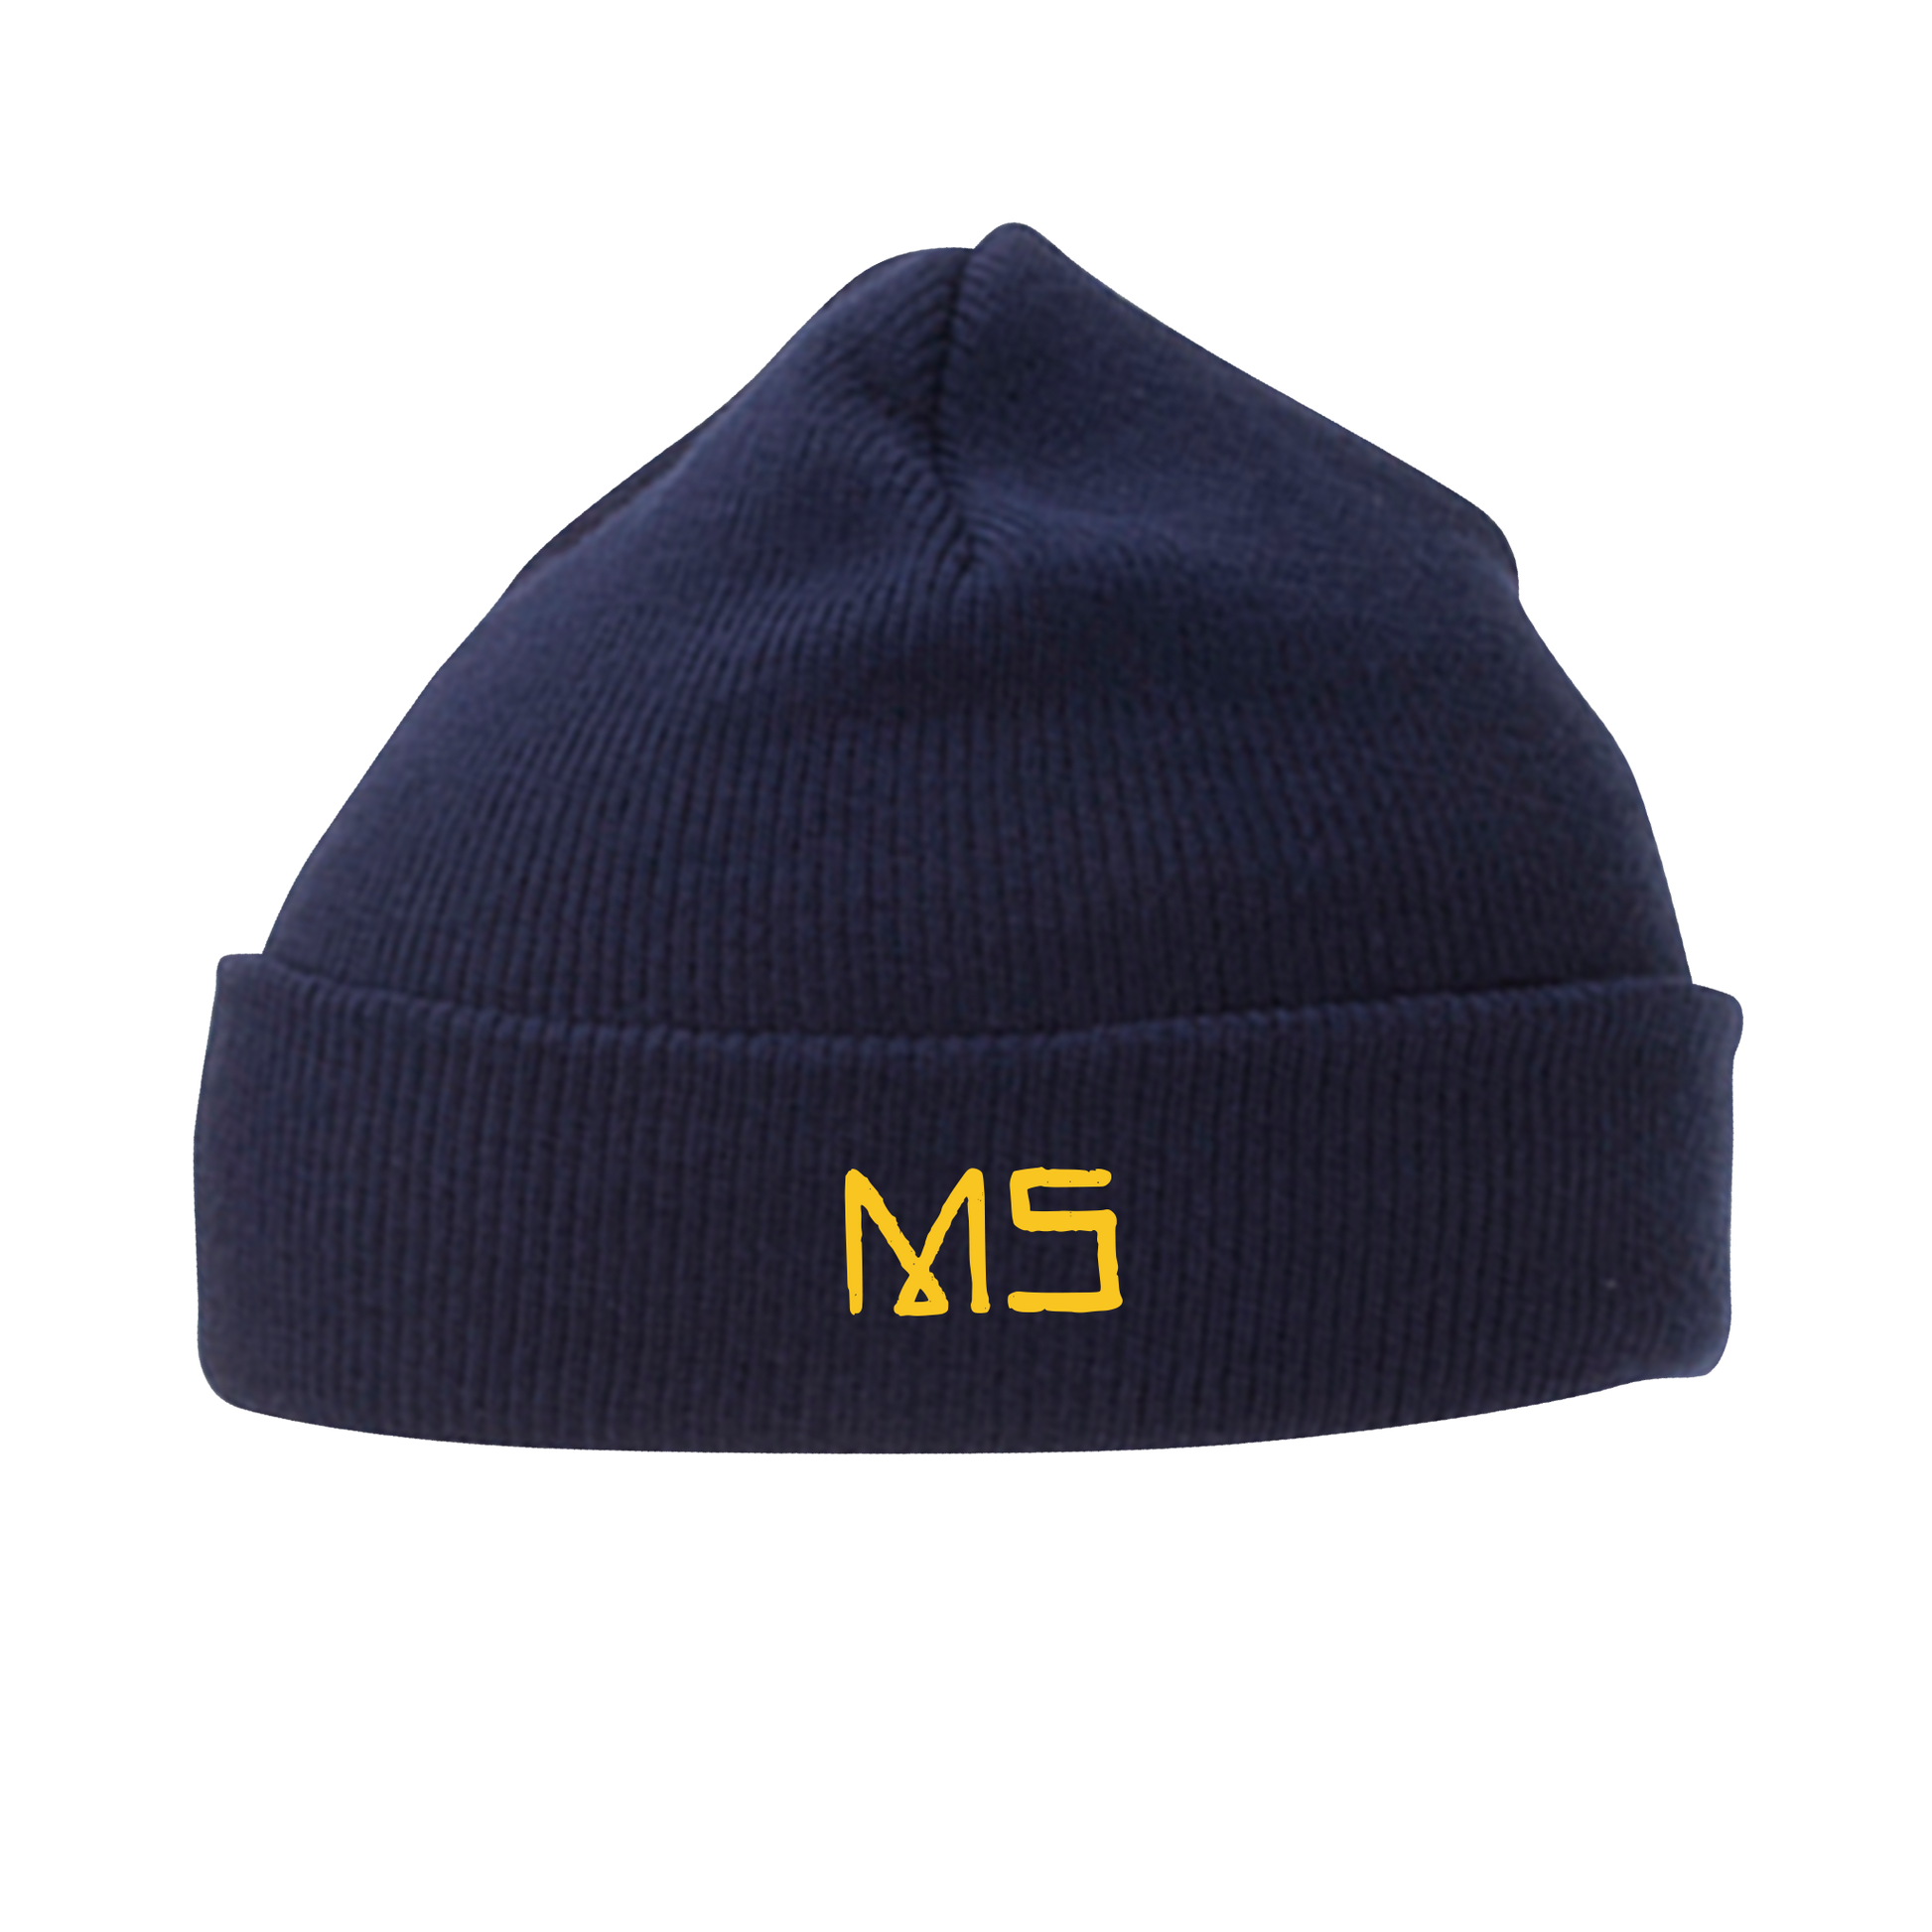 MS embroidered Navy Knit Beanie